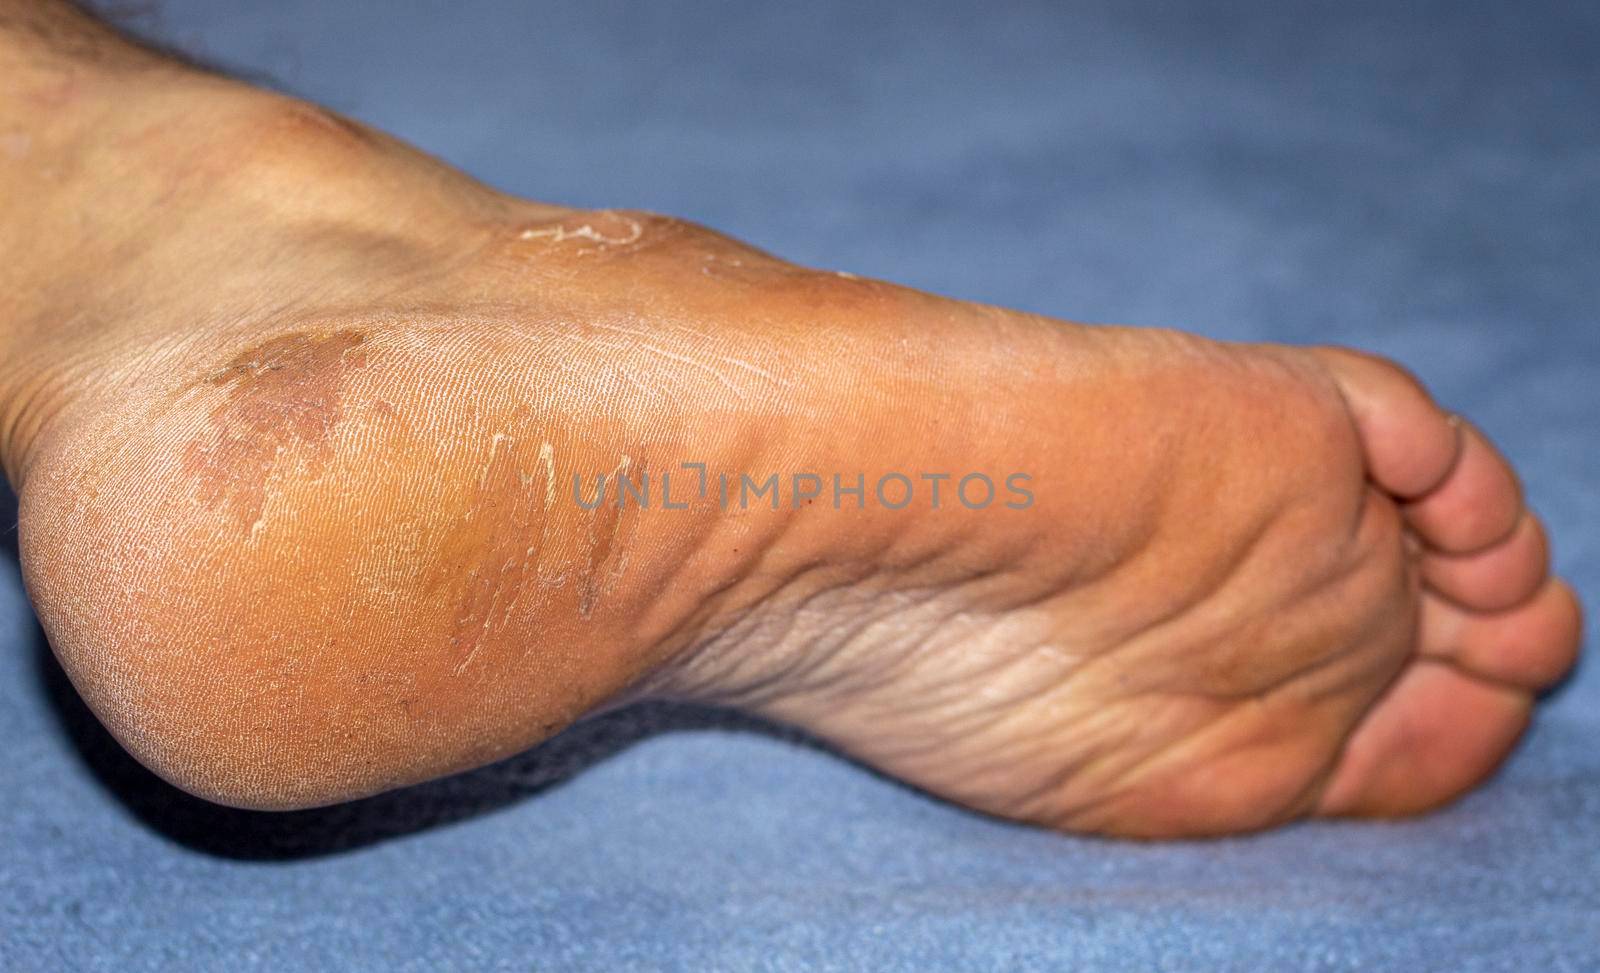 Heel disease with hard skin and itchy soles